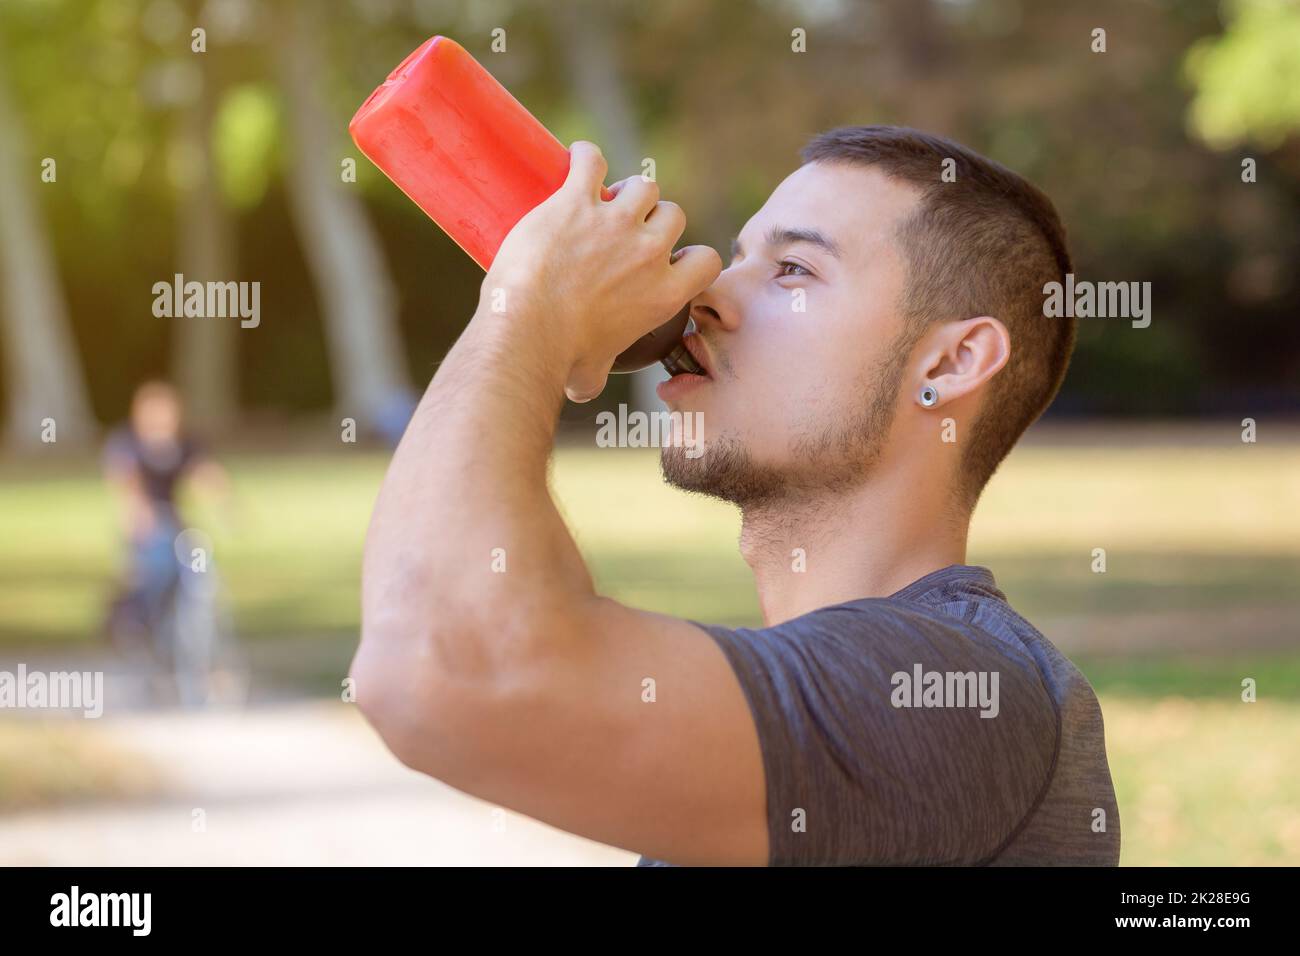 Drinking water runner young man drink jogger sports training fitness workout Stock Photo